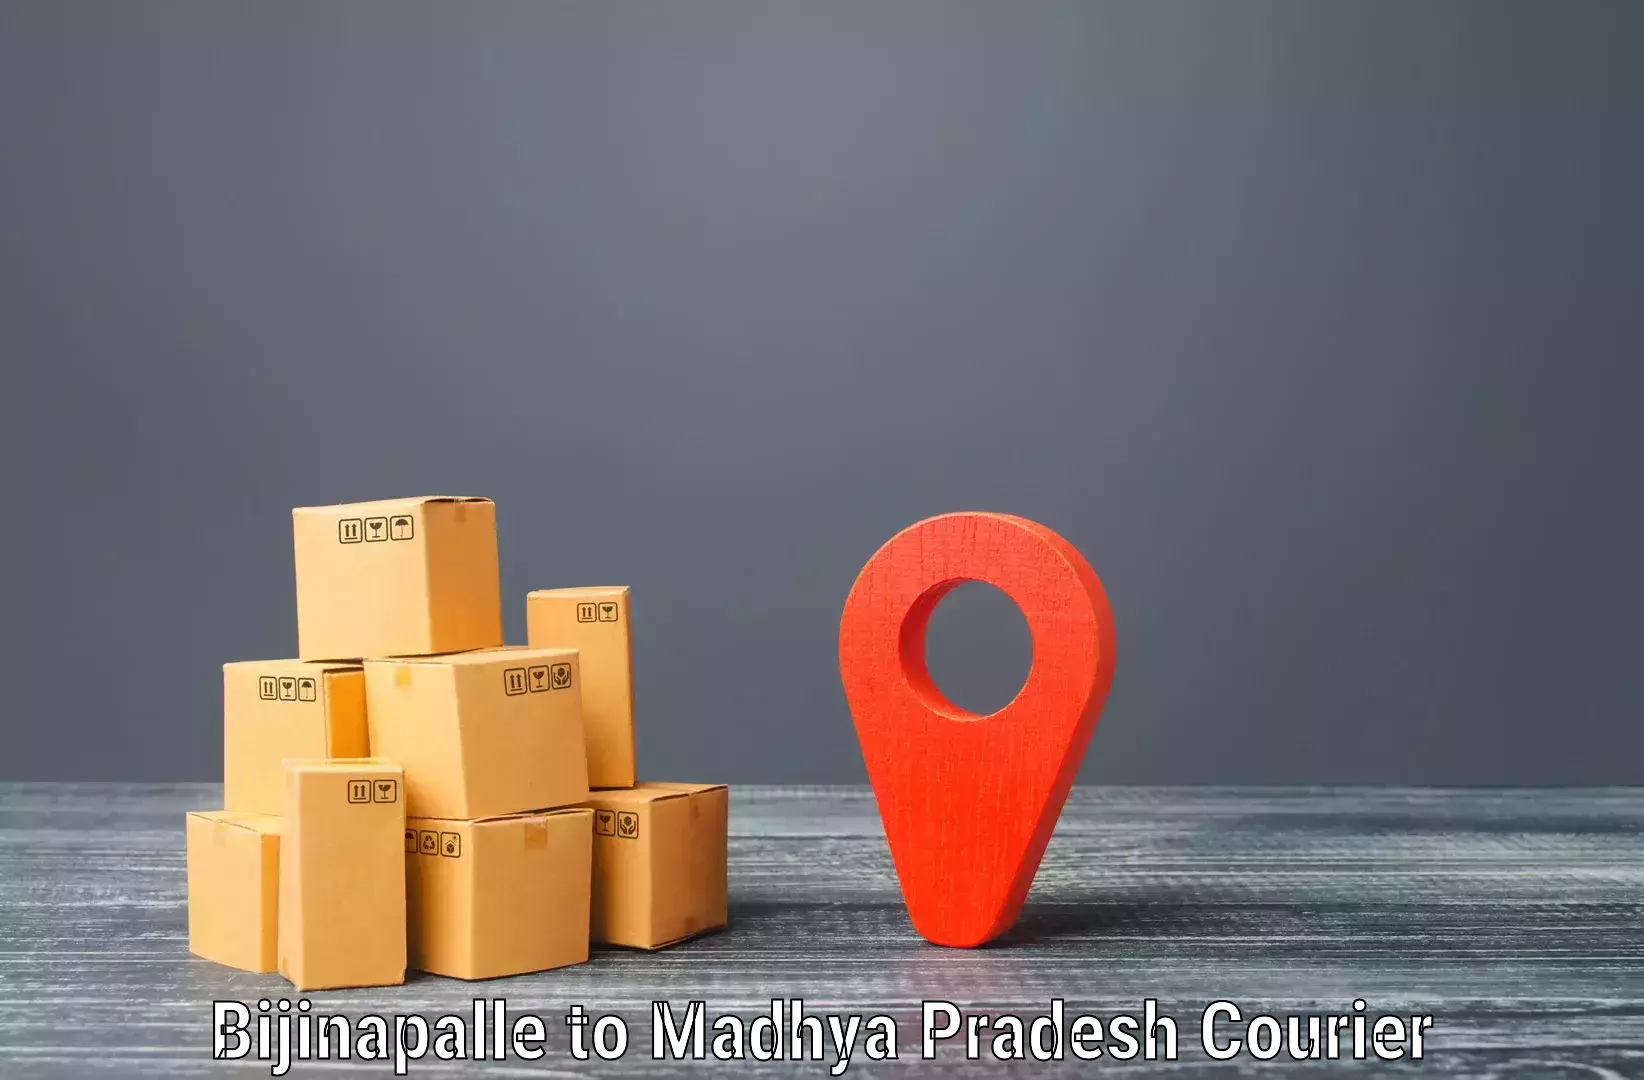 Fast-track shipping solutions Bijinapalle to Dewas